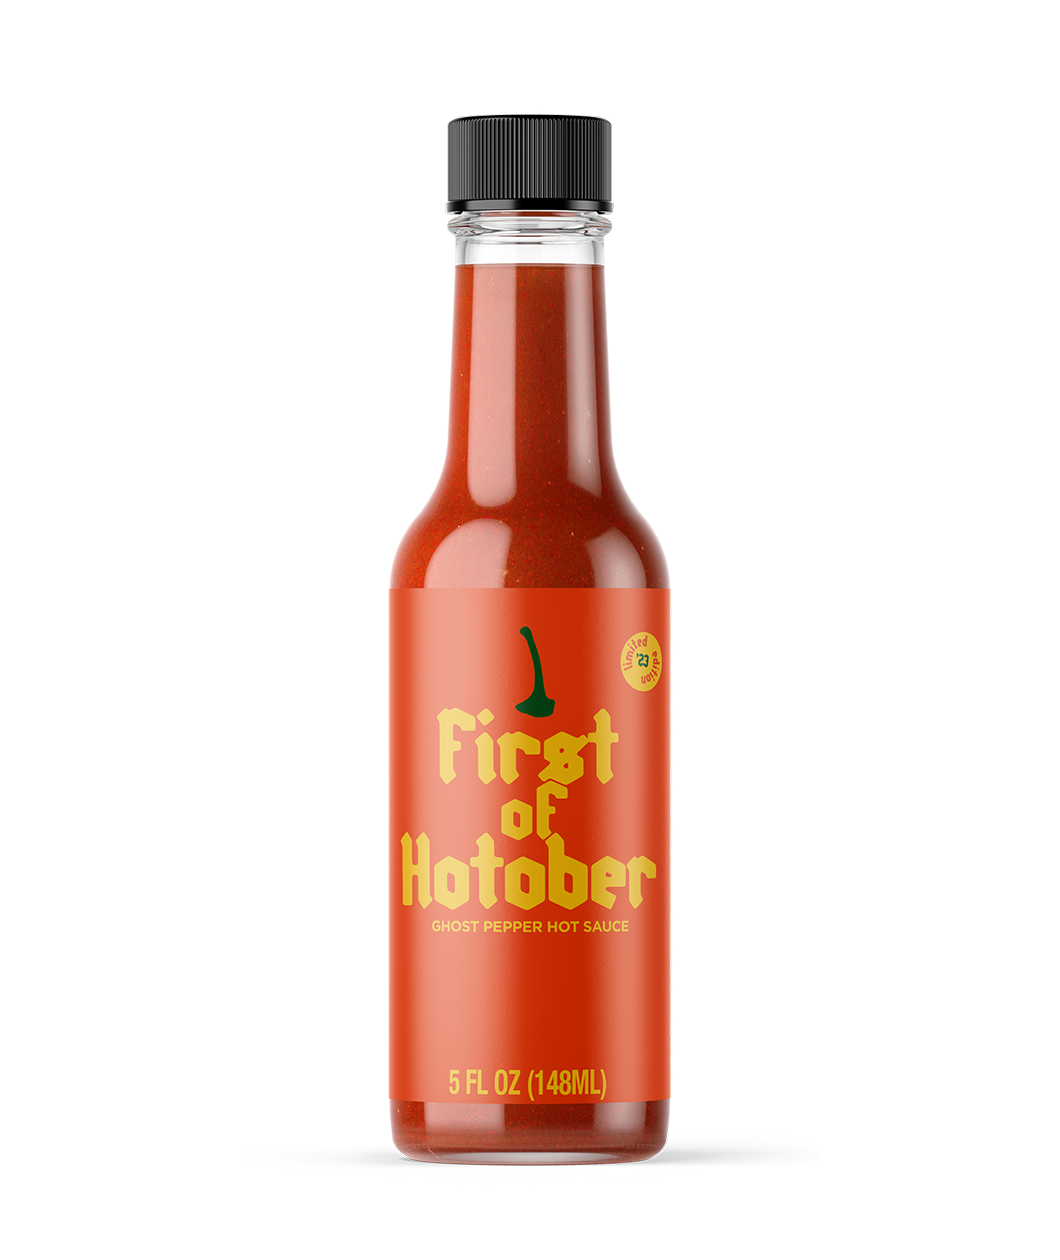 A glass 5oz bottle of red hot sauce with a label that reads 